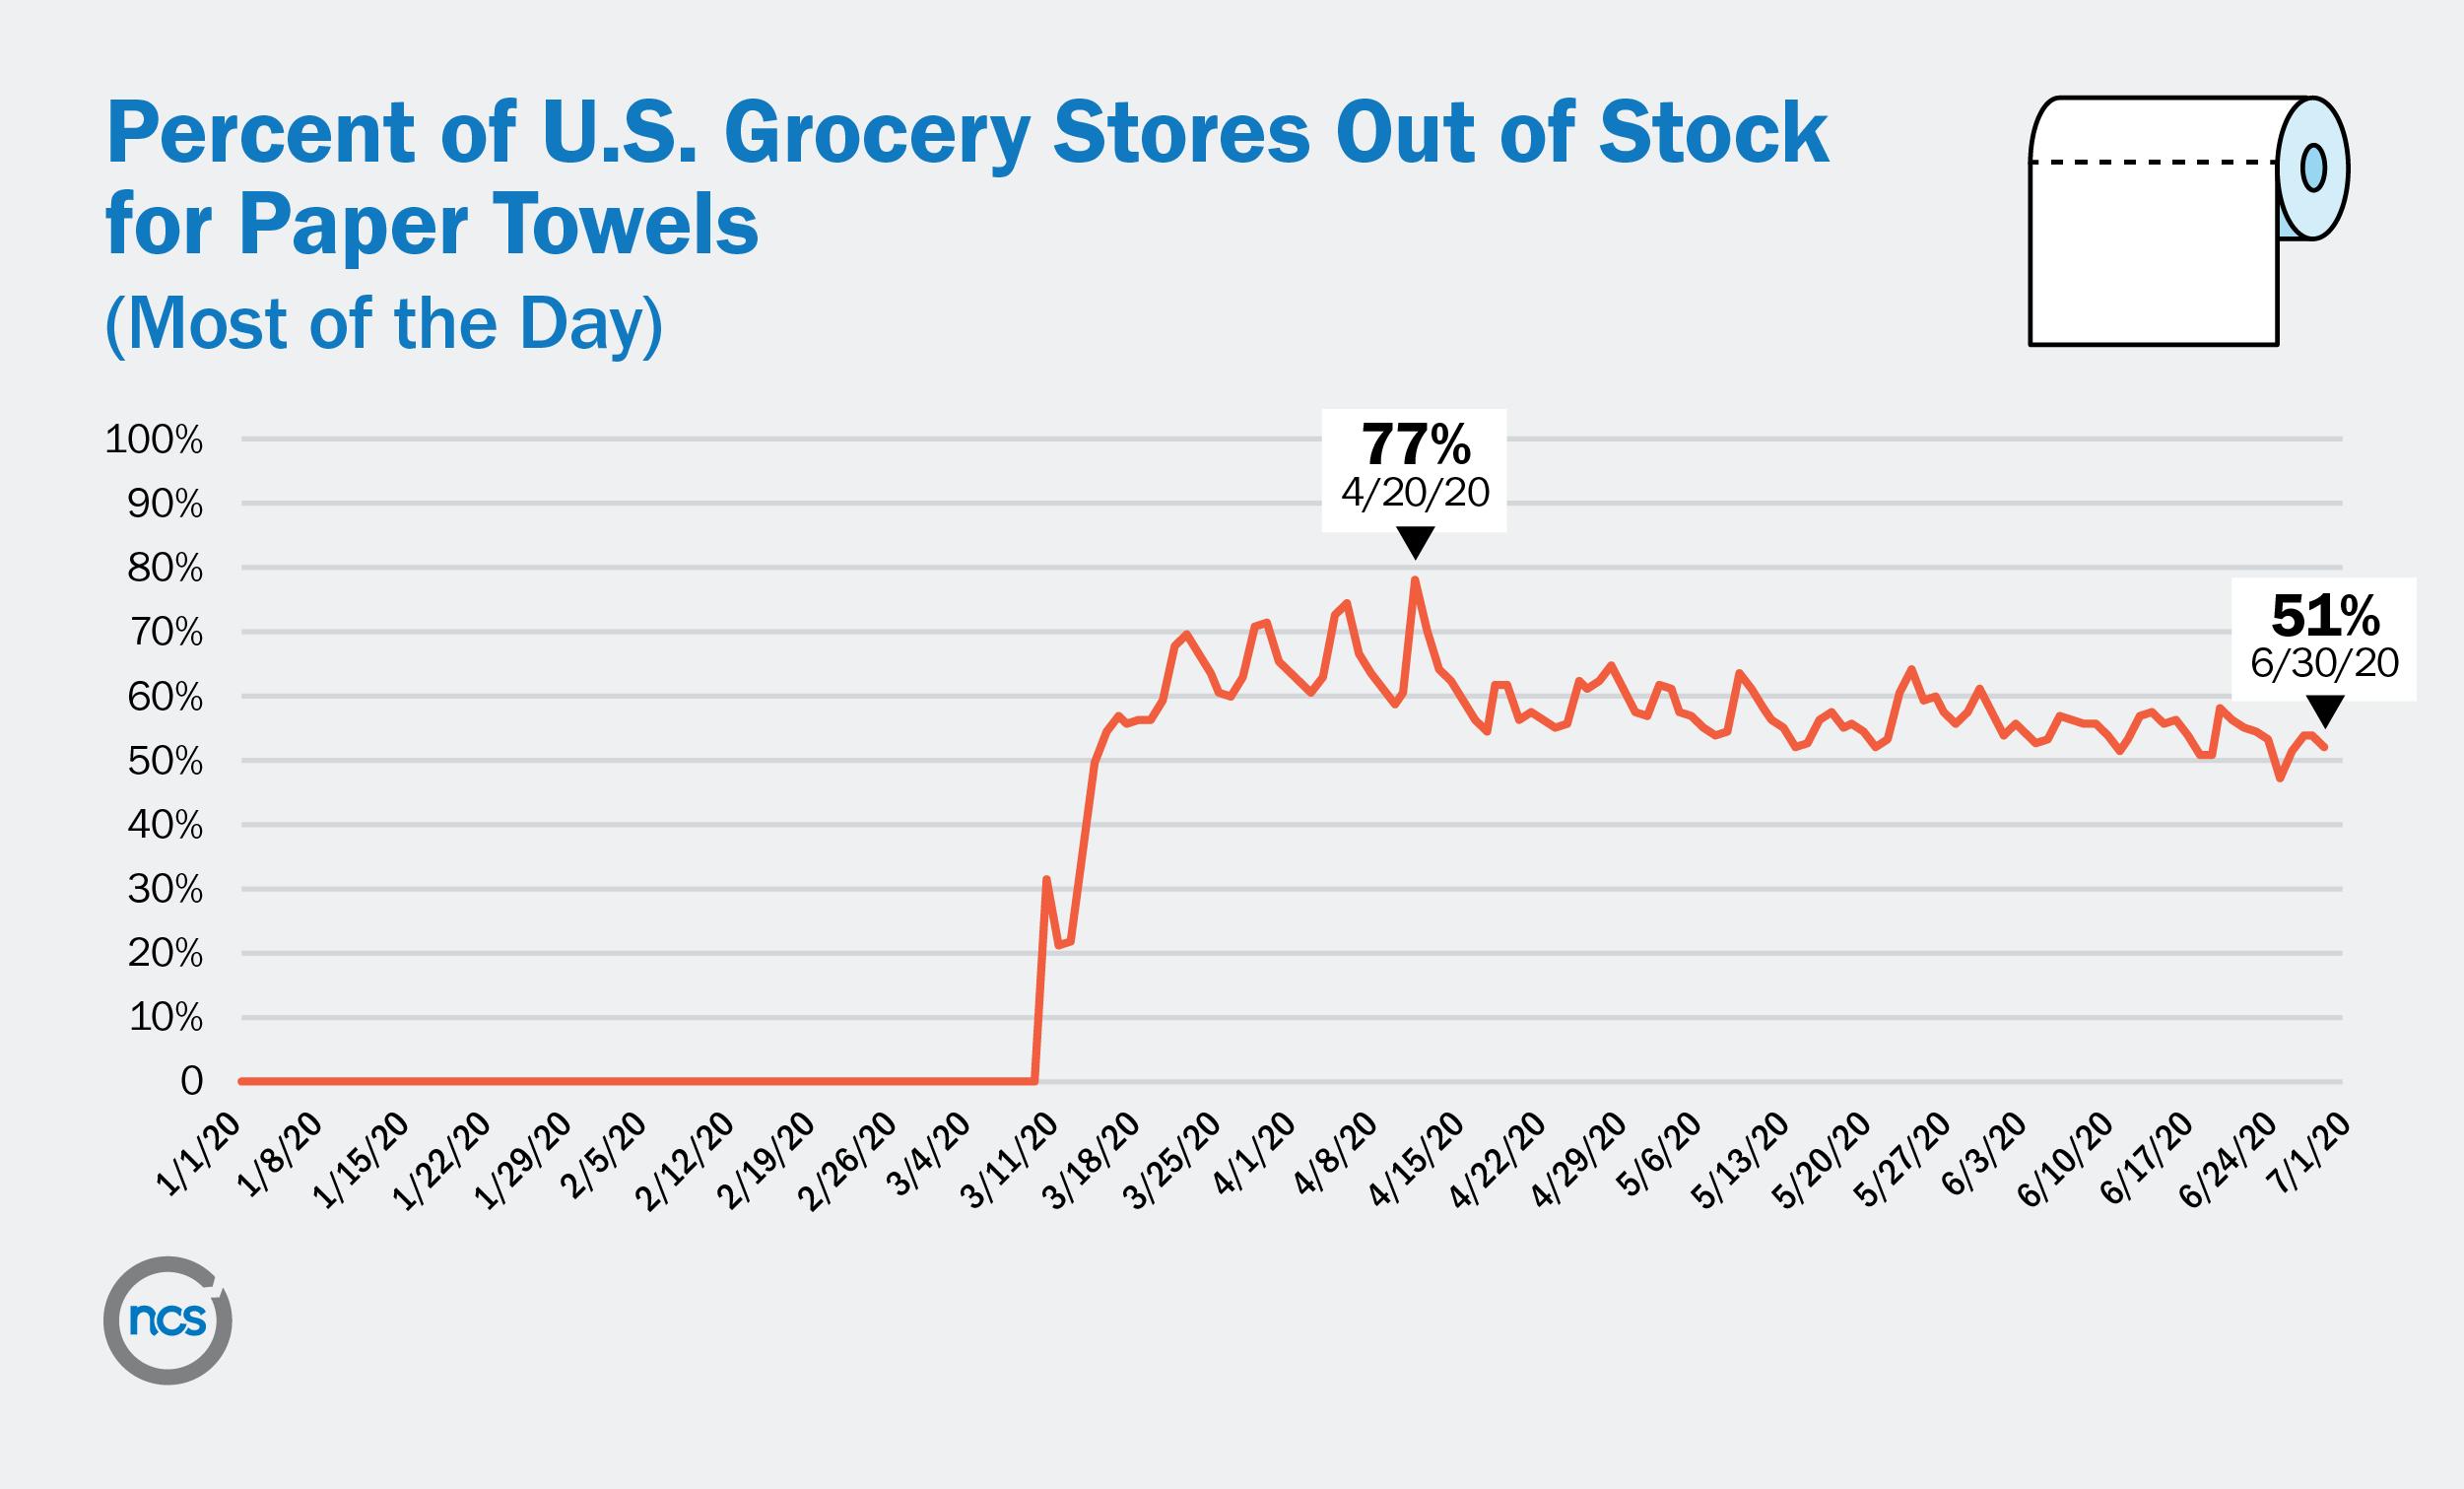 Percent of U.S. Grocery stores out of stock for paper towels up 77% of 4/20/20 and down 51% 6/30/20.